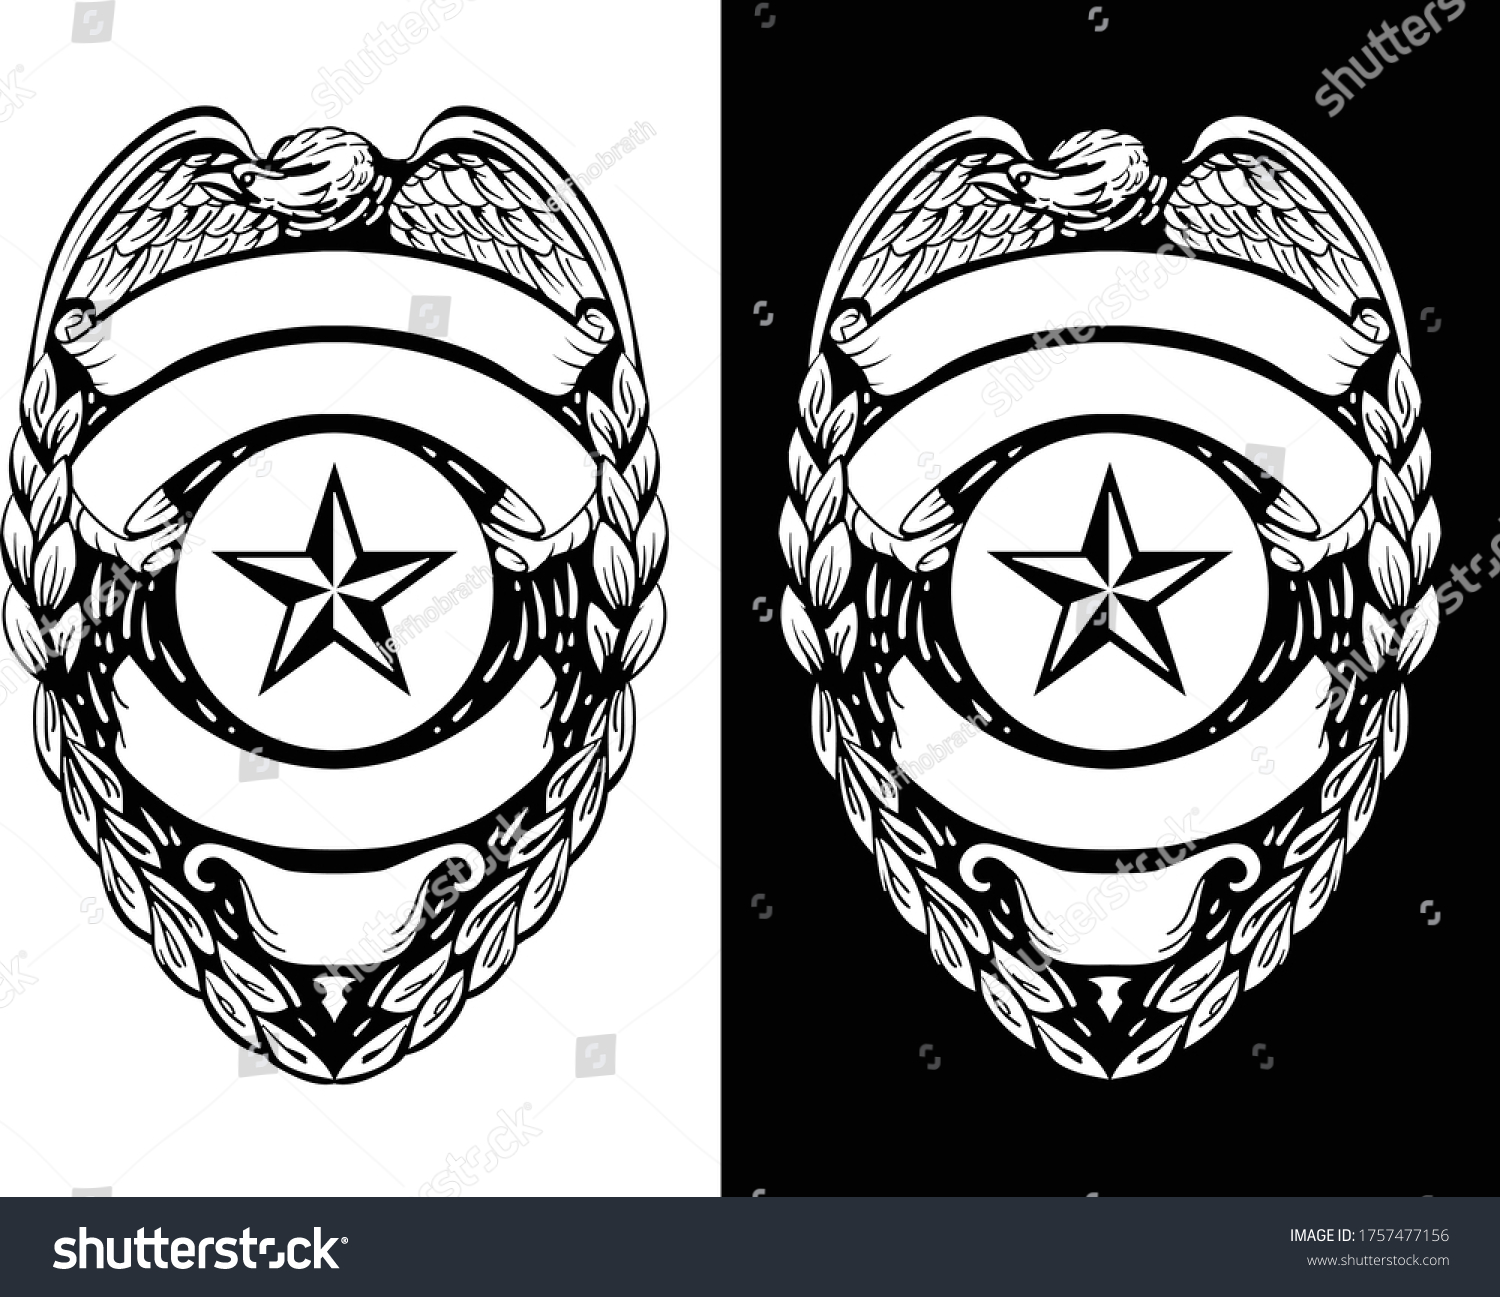 SVG of Police, Sheriff,  Law Enforcement Badge Isolated Vector Illustration in both Black Line Art and White Versions svg